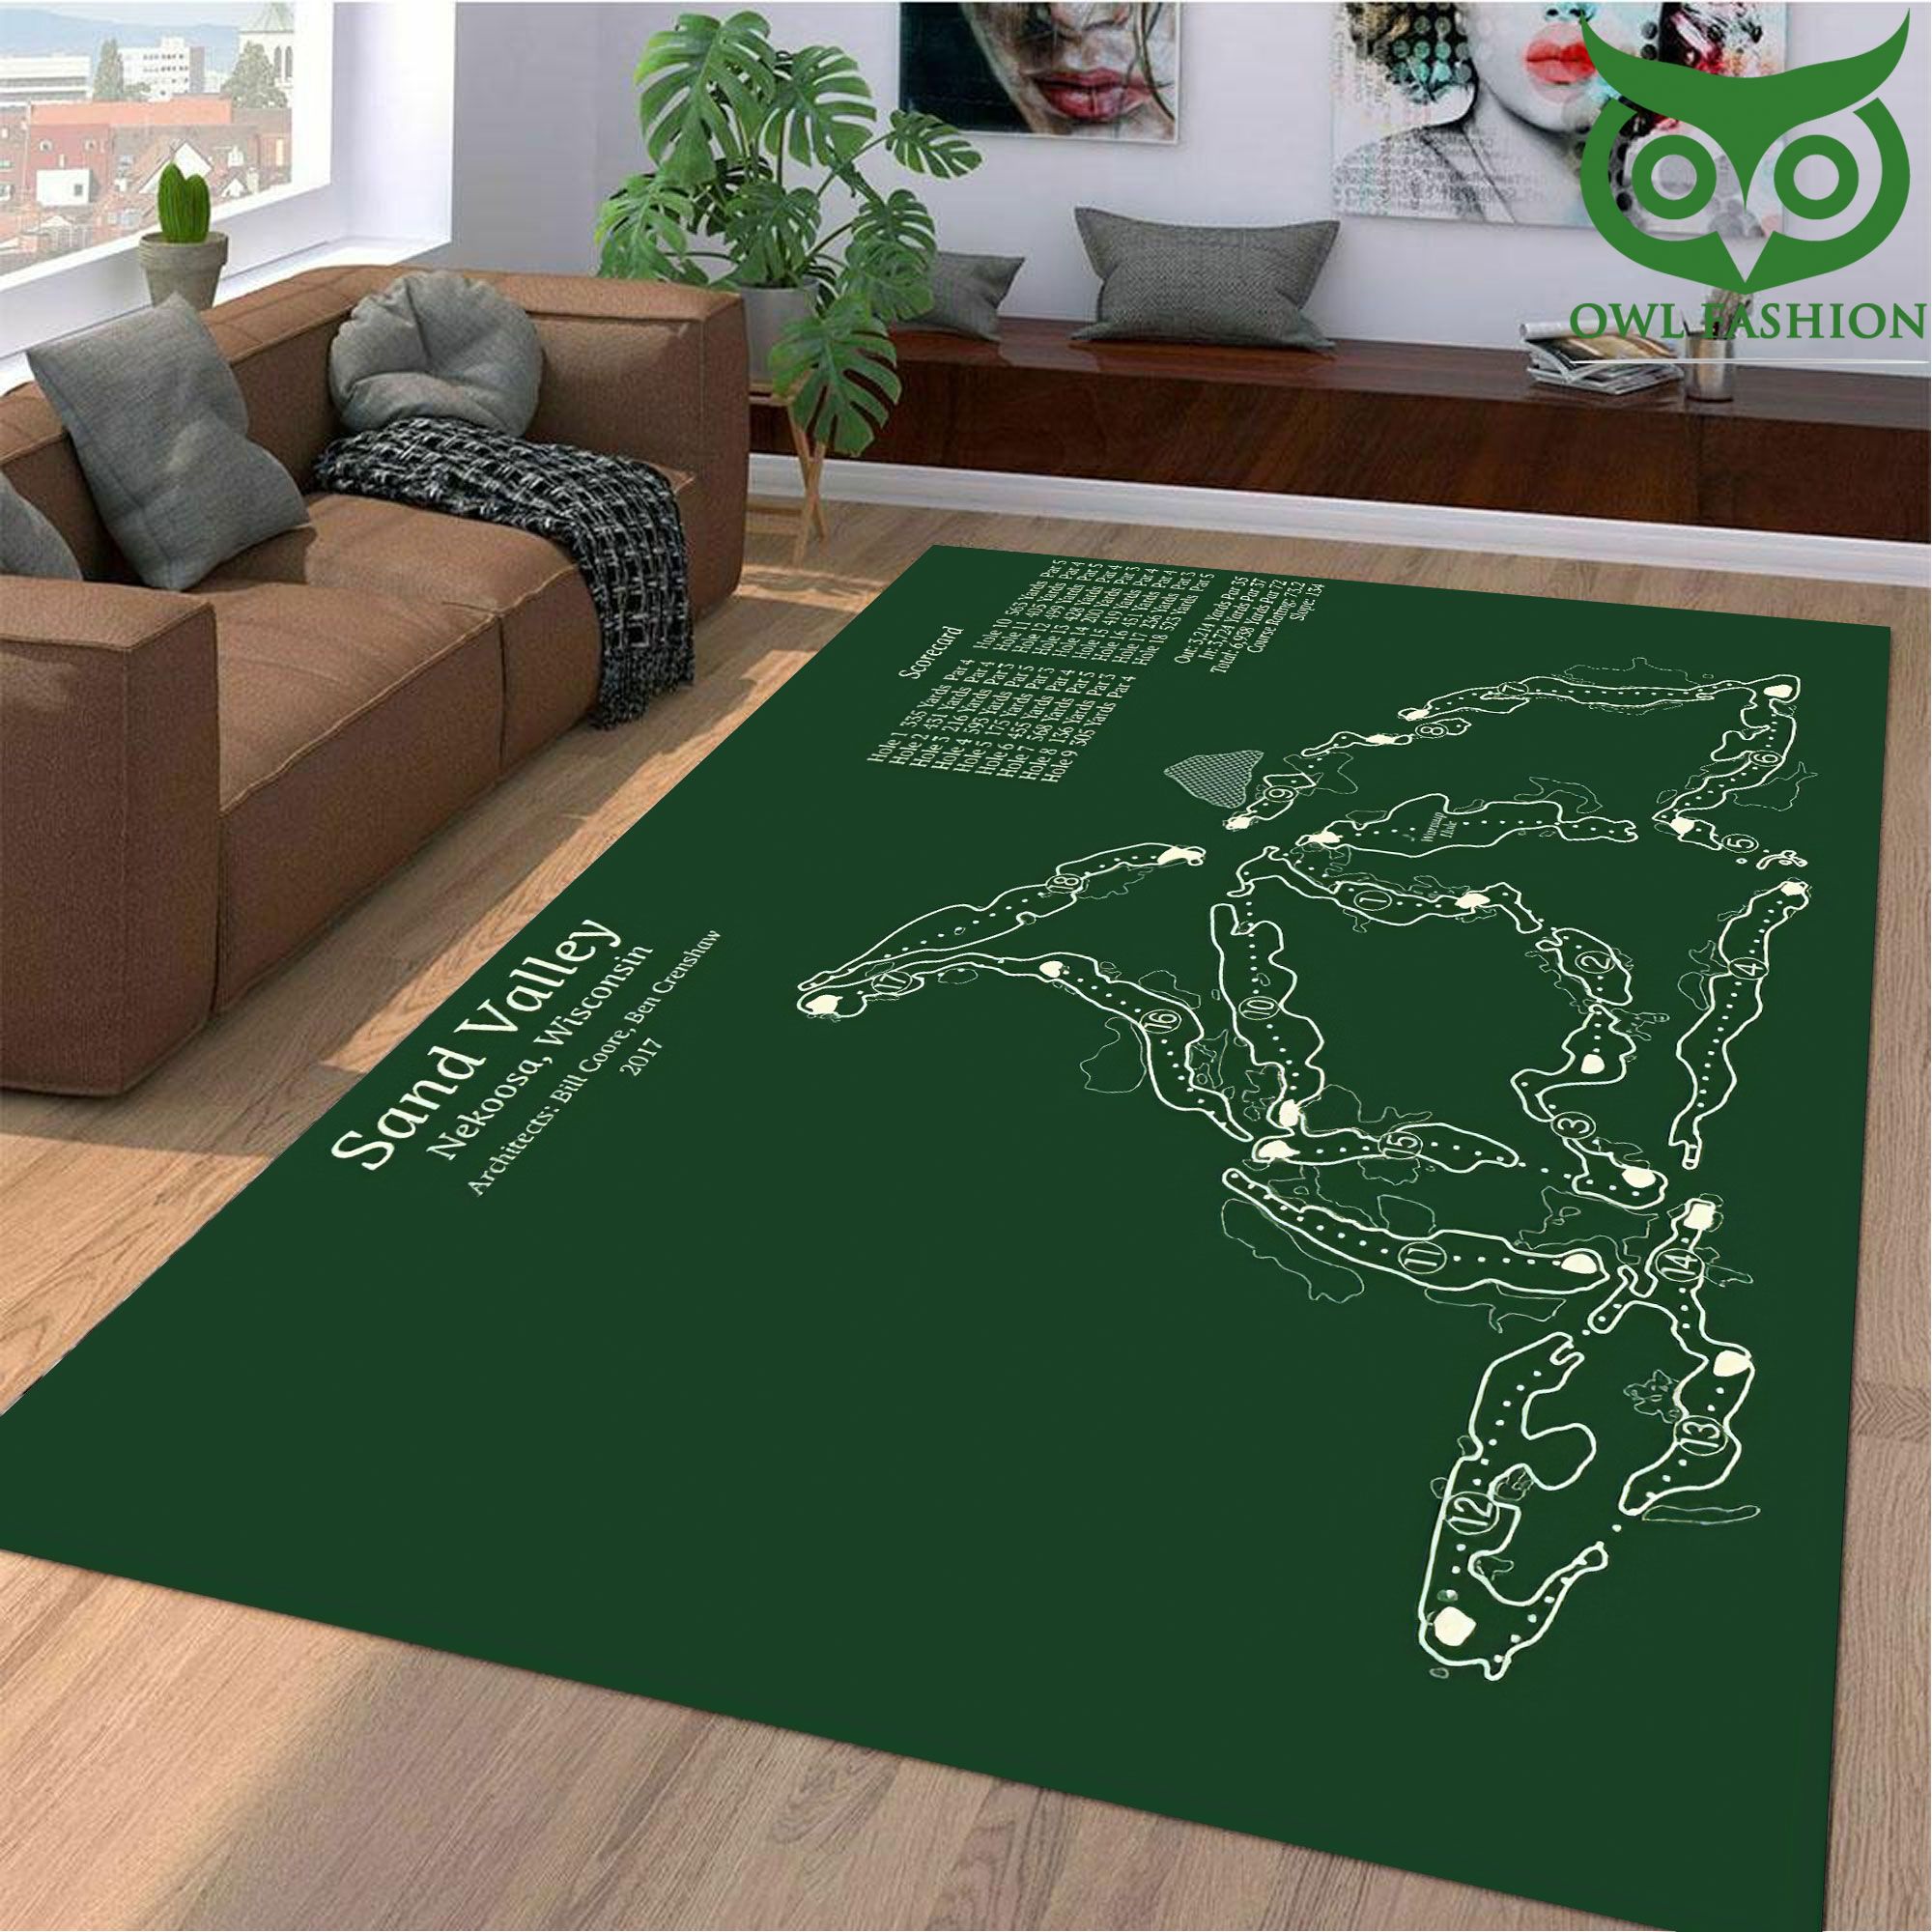 Sand Valley Golf Course map Limited Edition 3D Carpet Rug